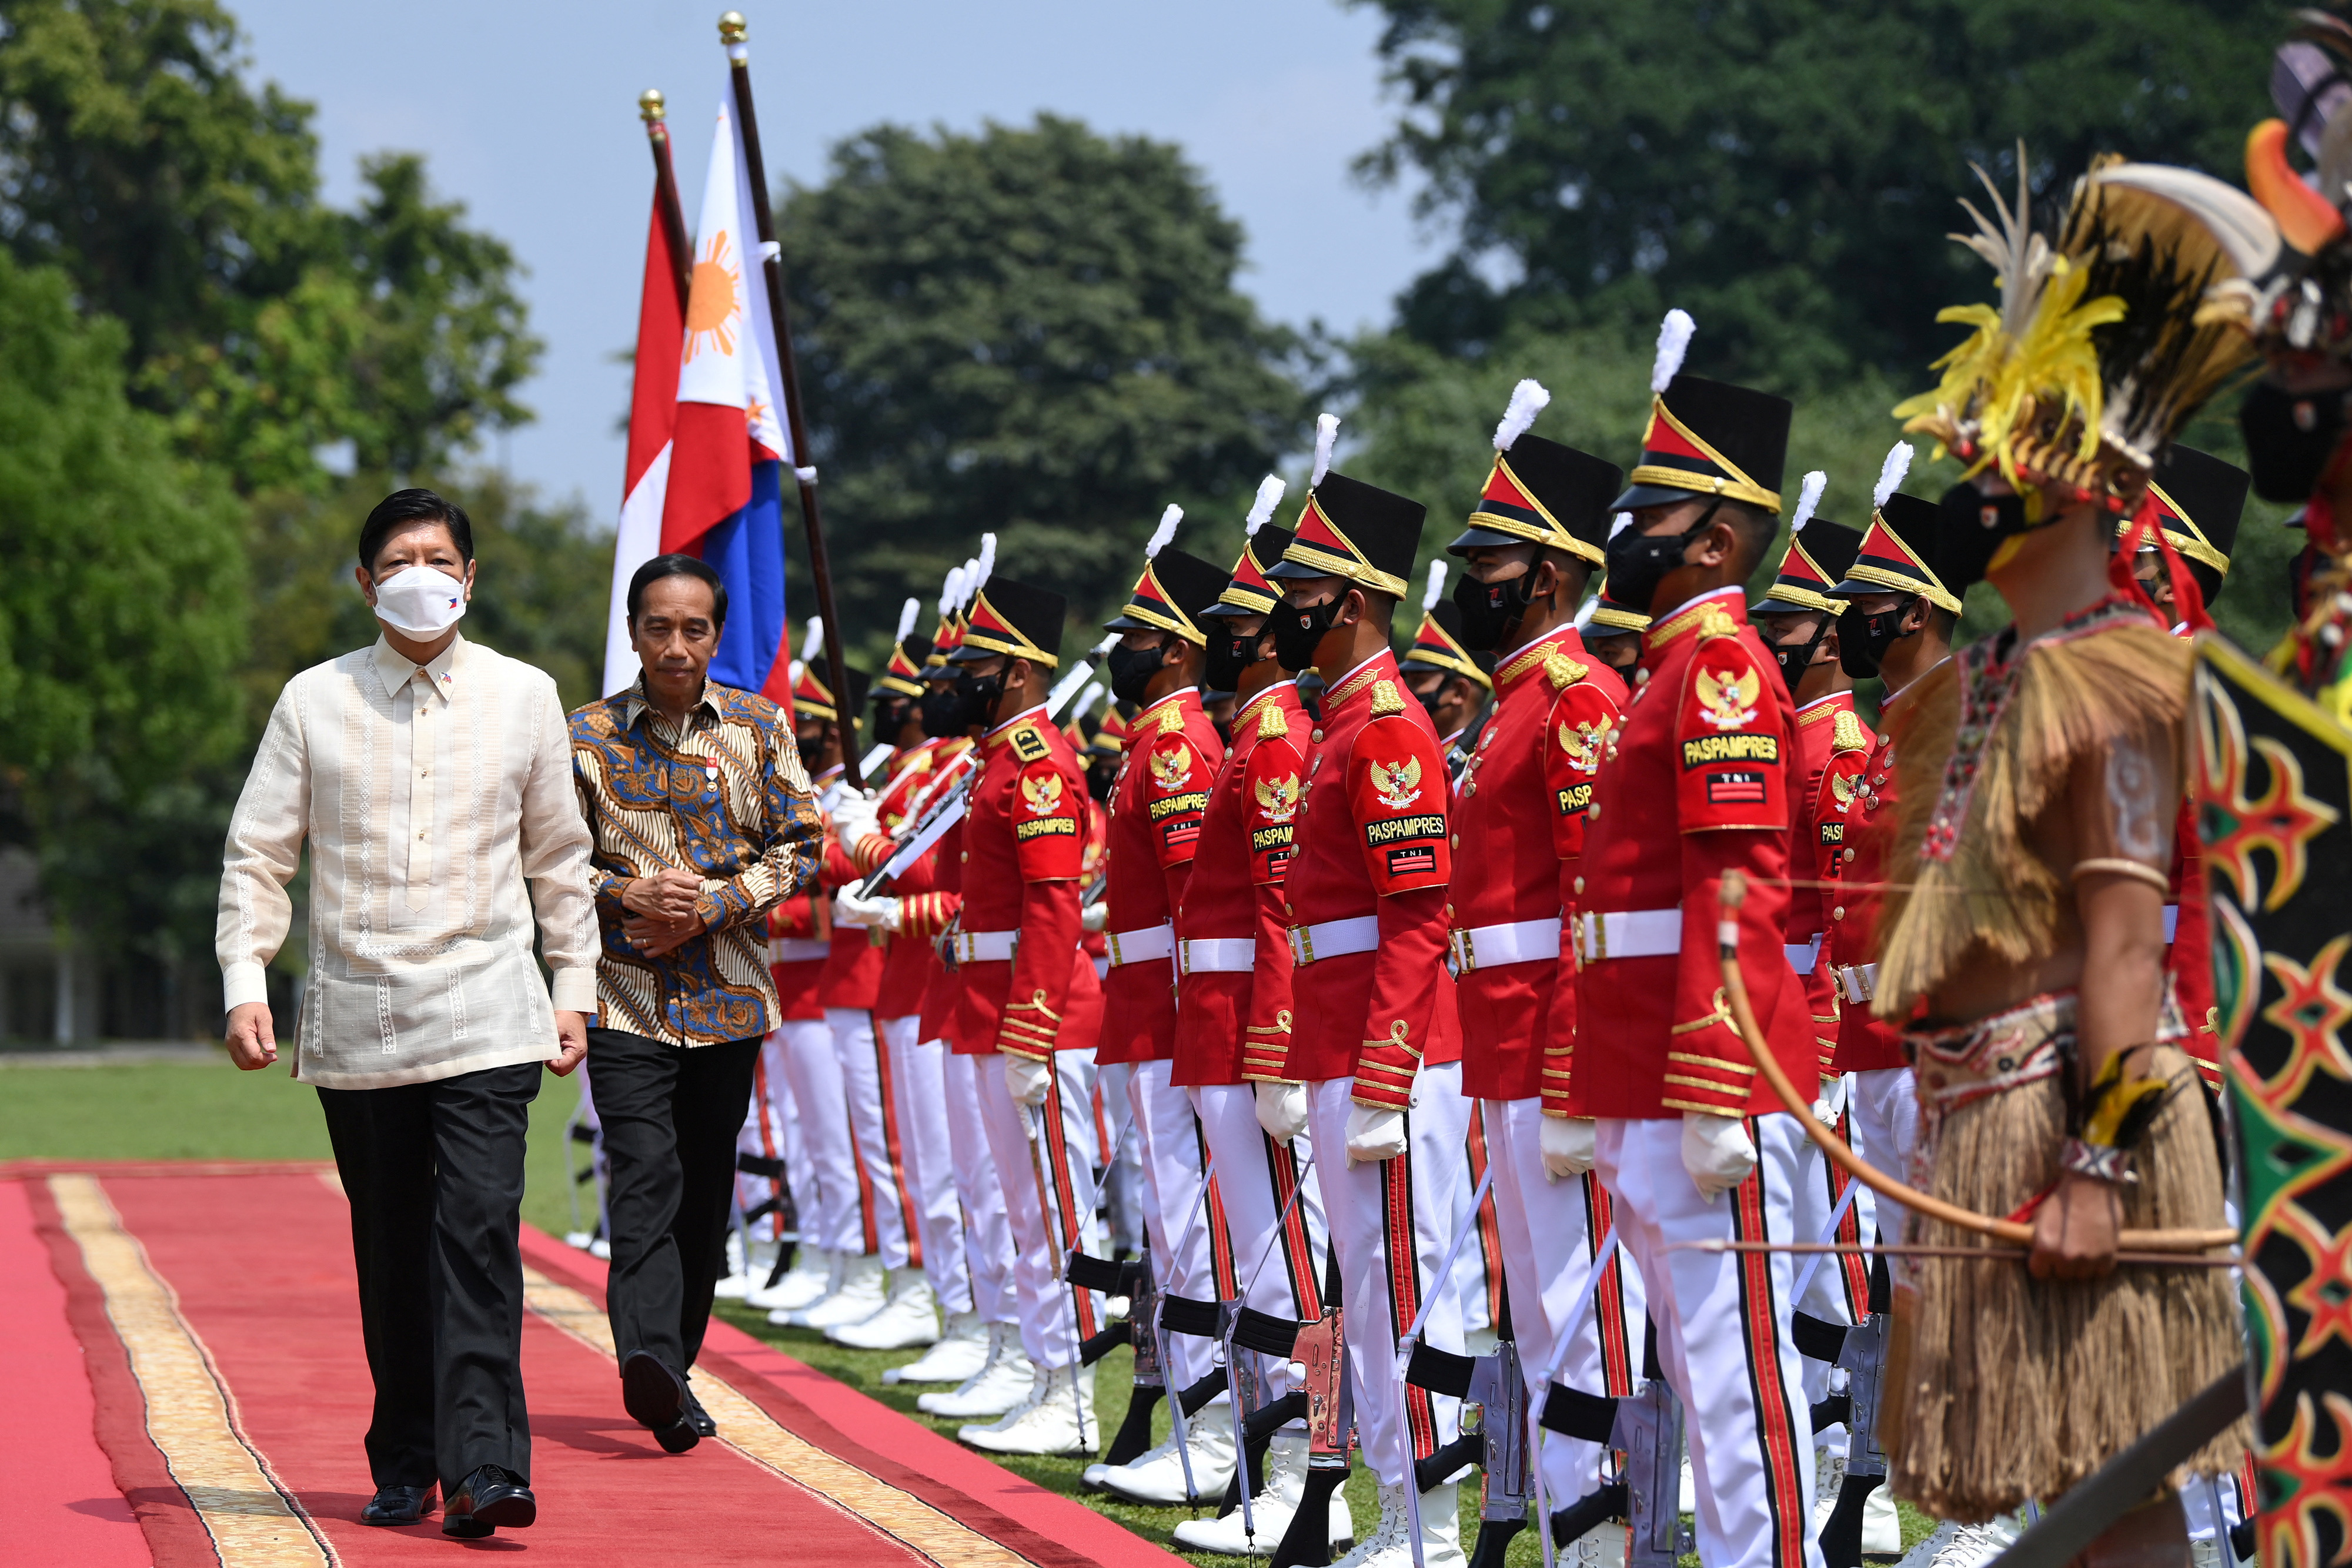 Indonesian President Joko Widodo walks with Philippine President Ferdinand "Bongbong" Marcos Jr. as they inspect the honour guards upon their arrival at the Presidential Palace in Bogor